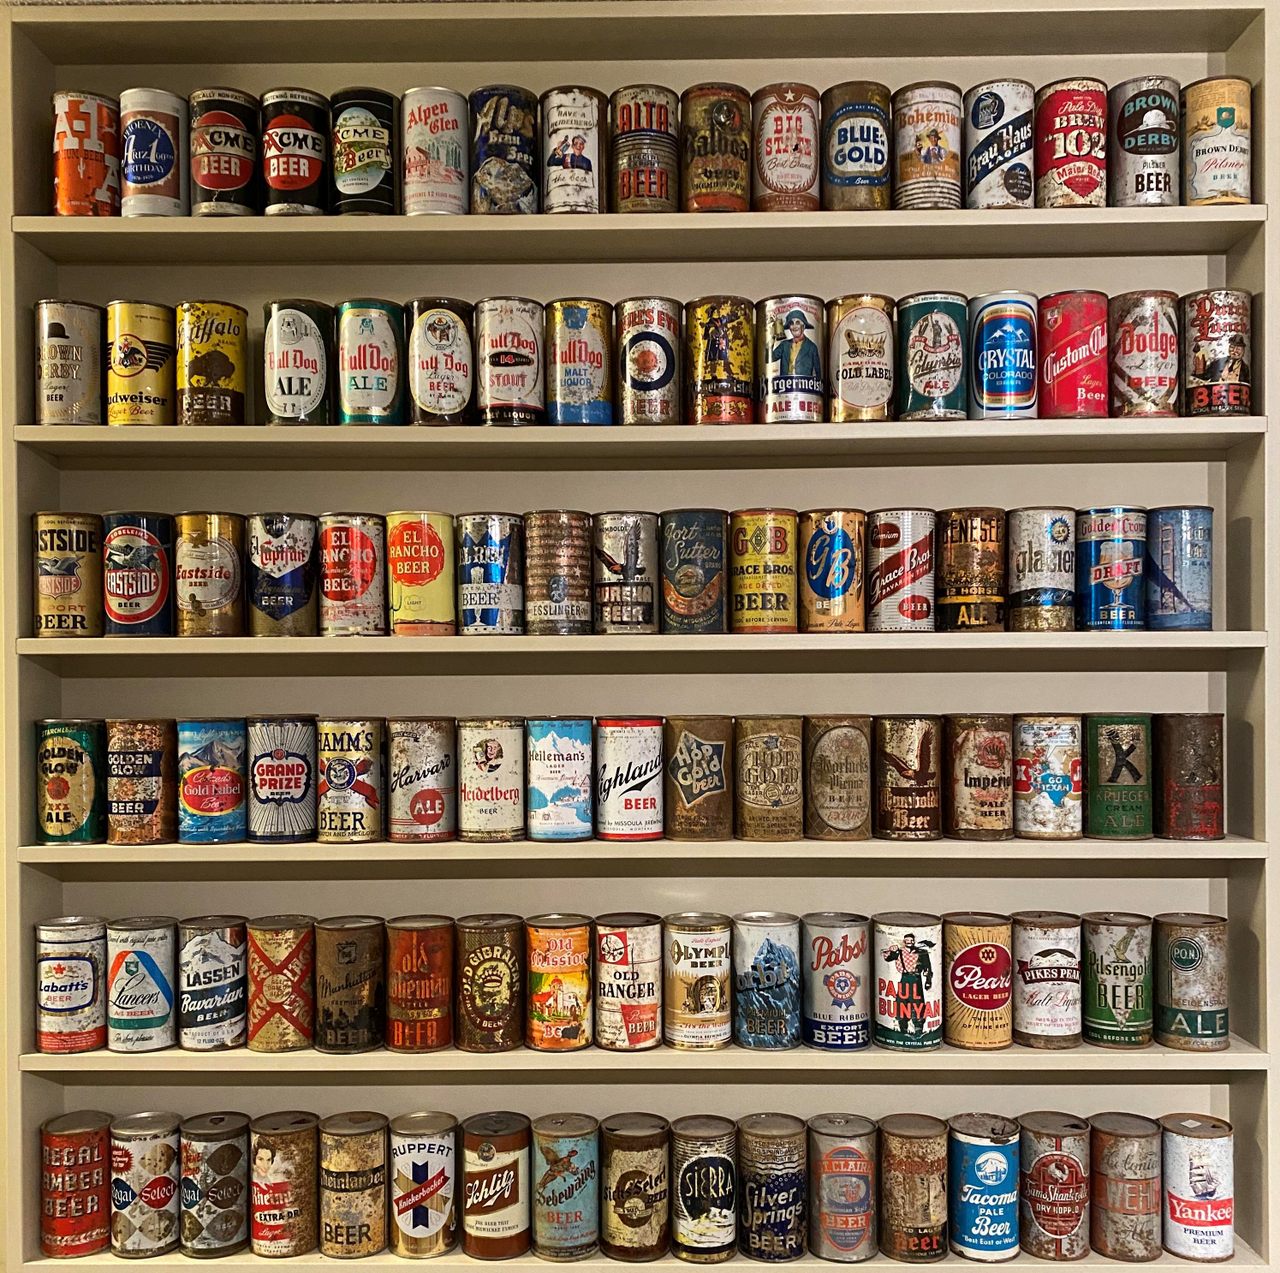 Hundreds of beer cans are displayed in Maxwell’s home, organized first by country and style, then arranged alphabetically by brand and age.